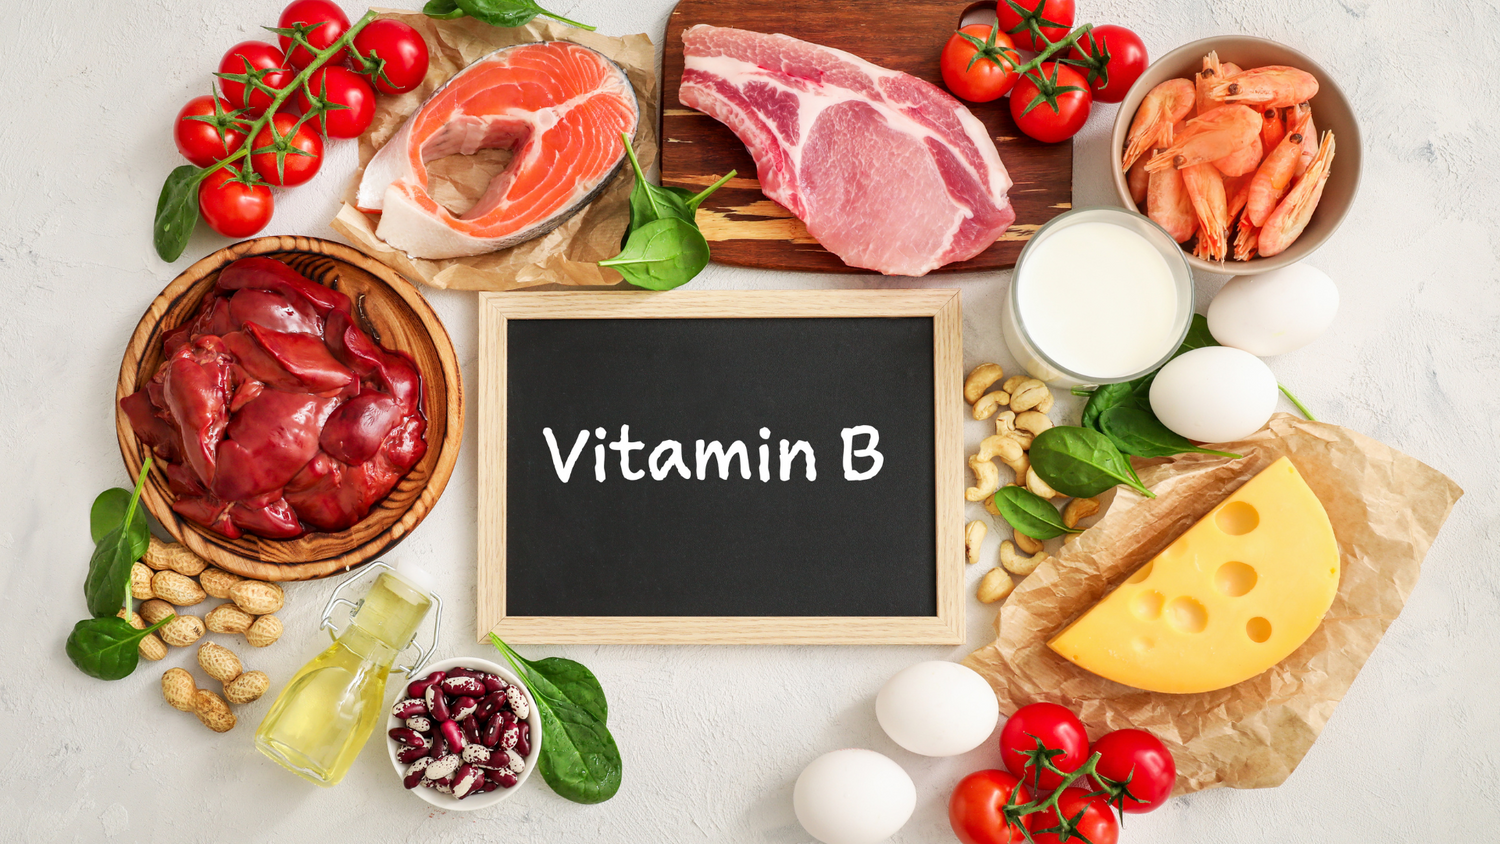 Boost Your Health: Top 15 Vitamin B-Rich Foods and Delicious Recipes